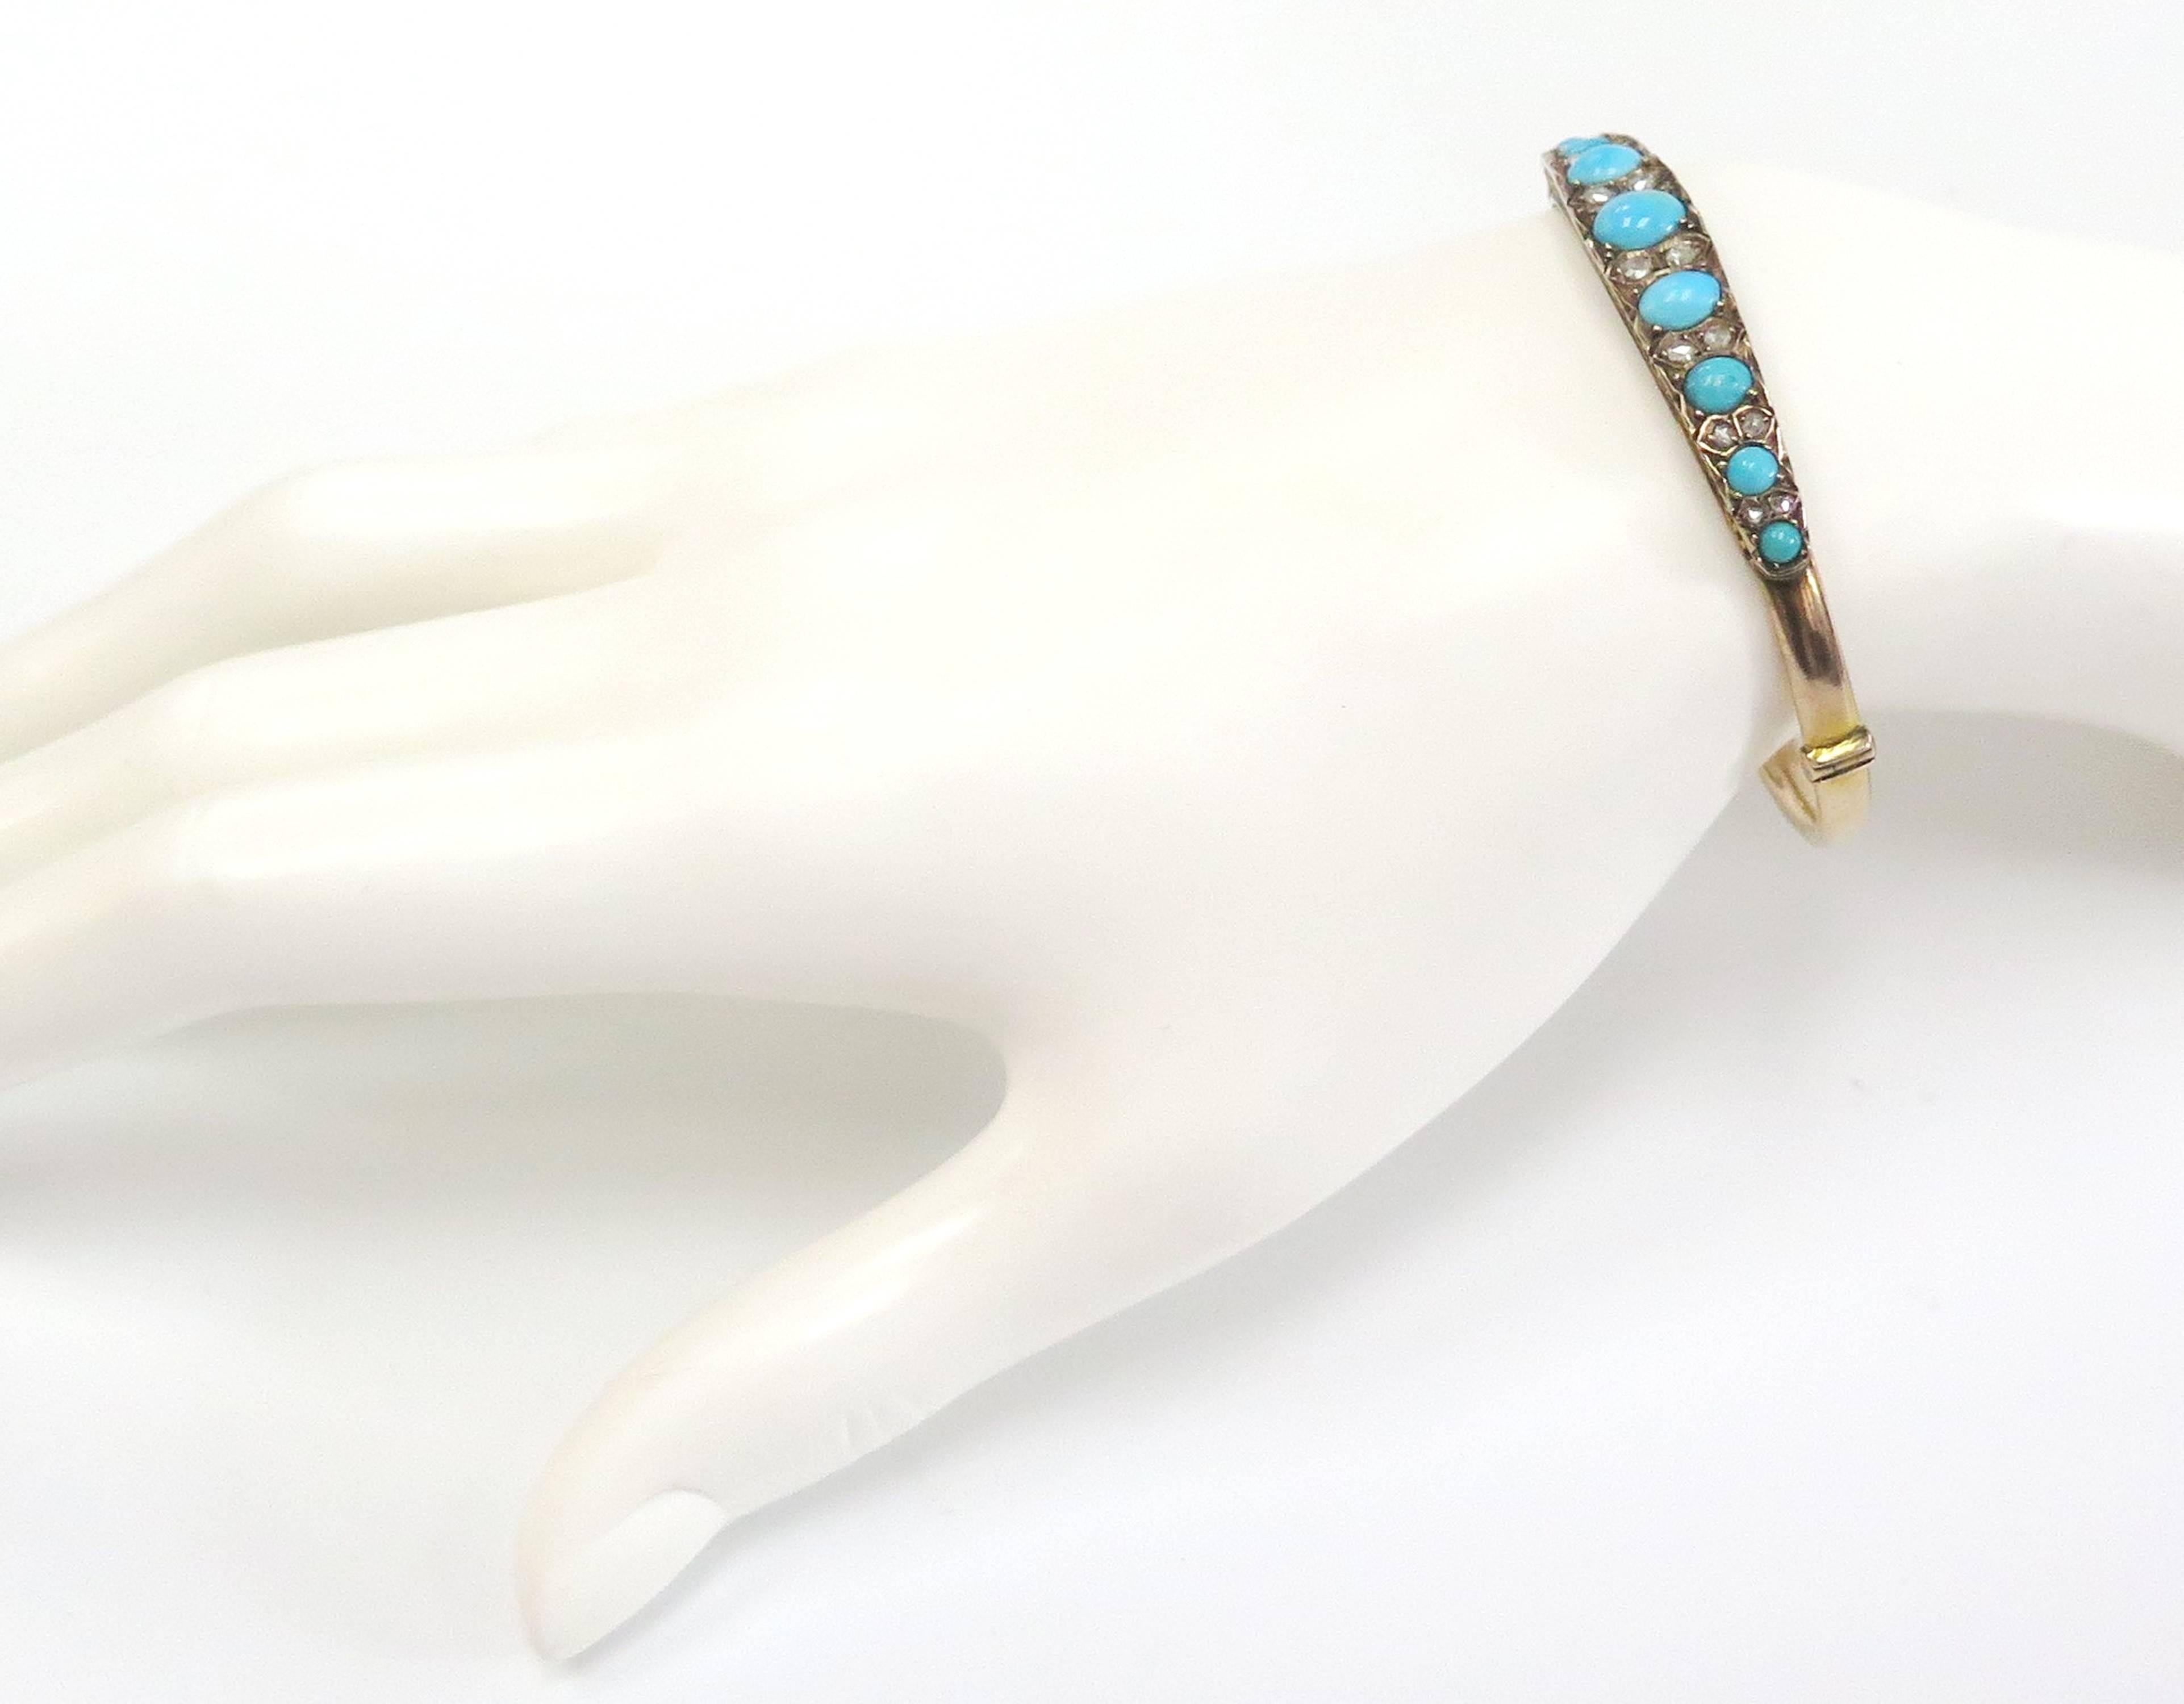 Antique Victorian 1800s Bangle with Turquoise, Rose Cut Diamonds, 14 Karat For Sale 2